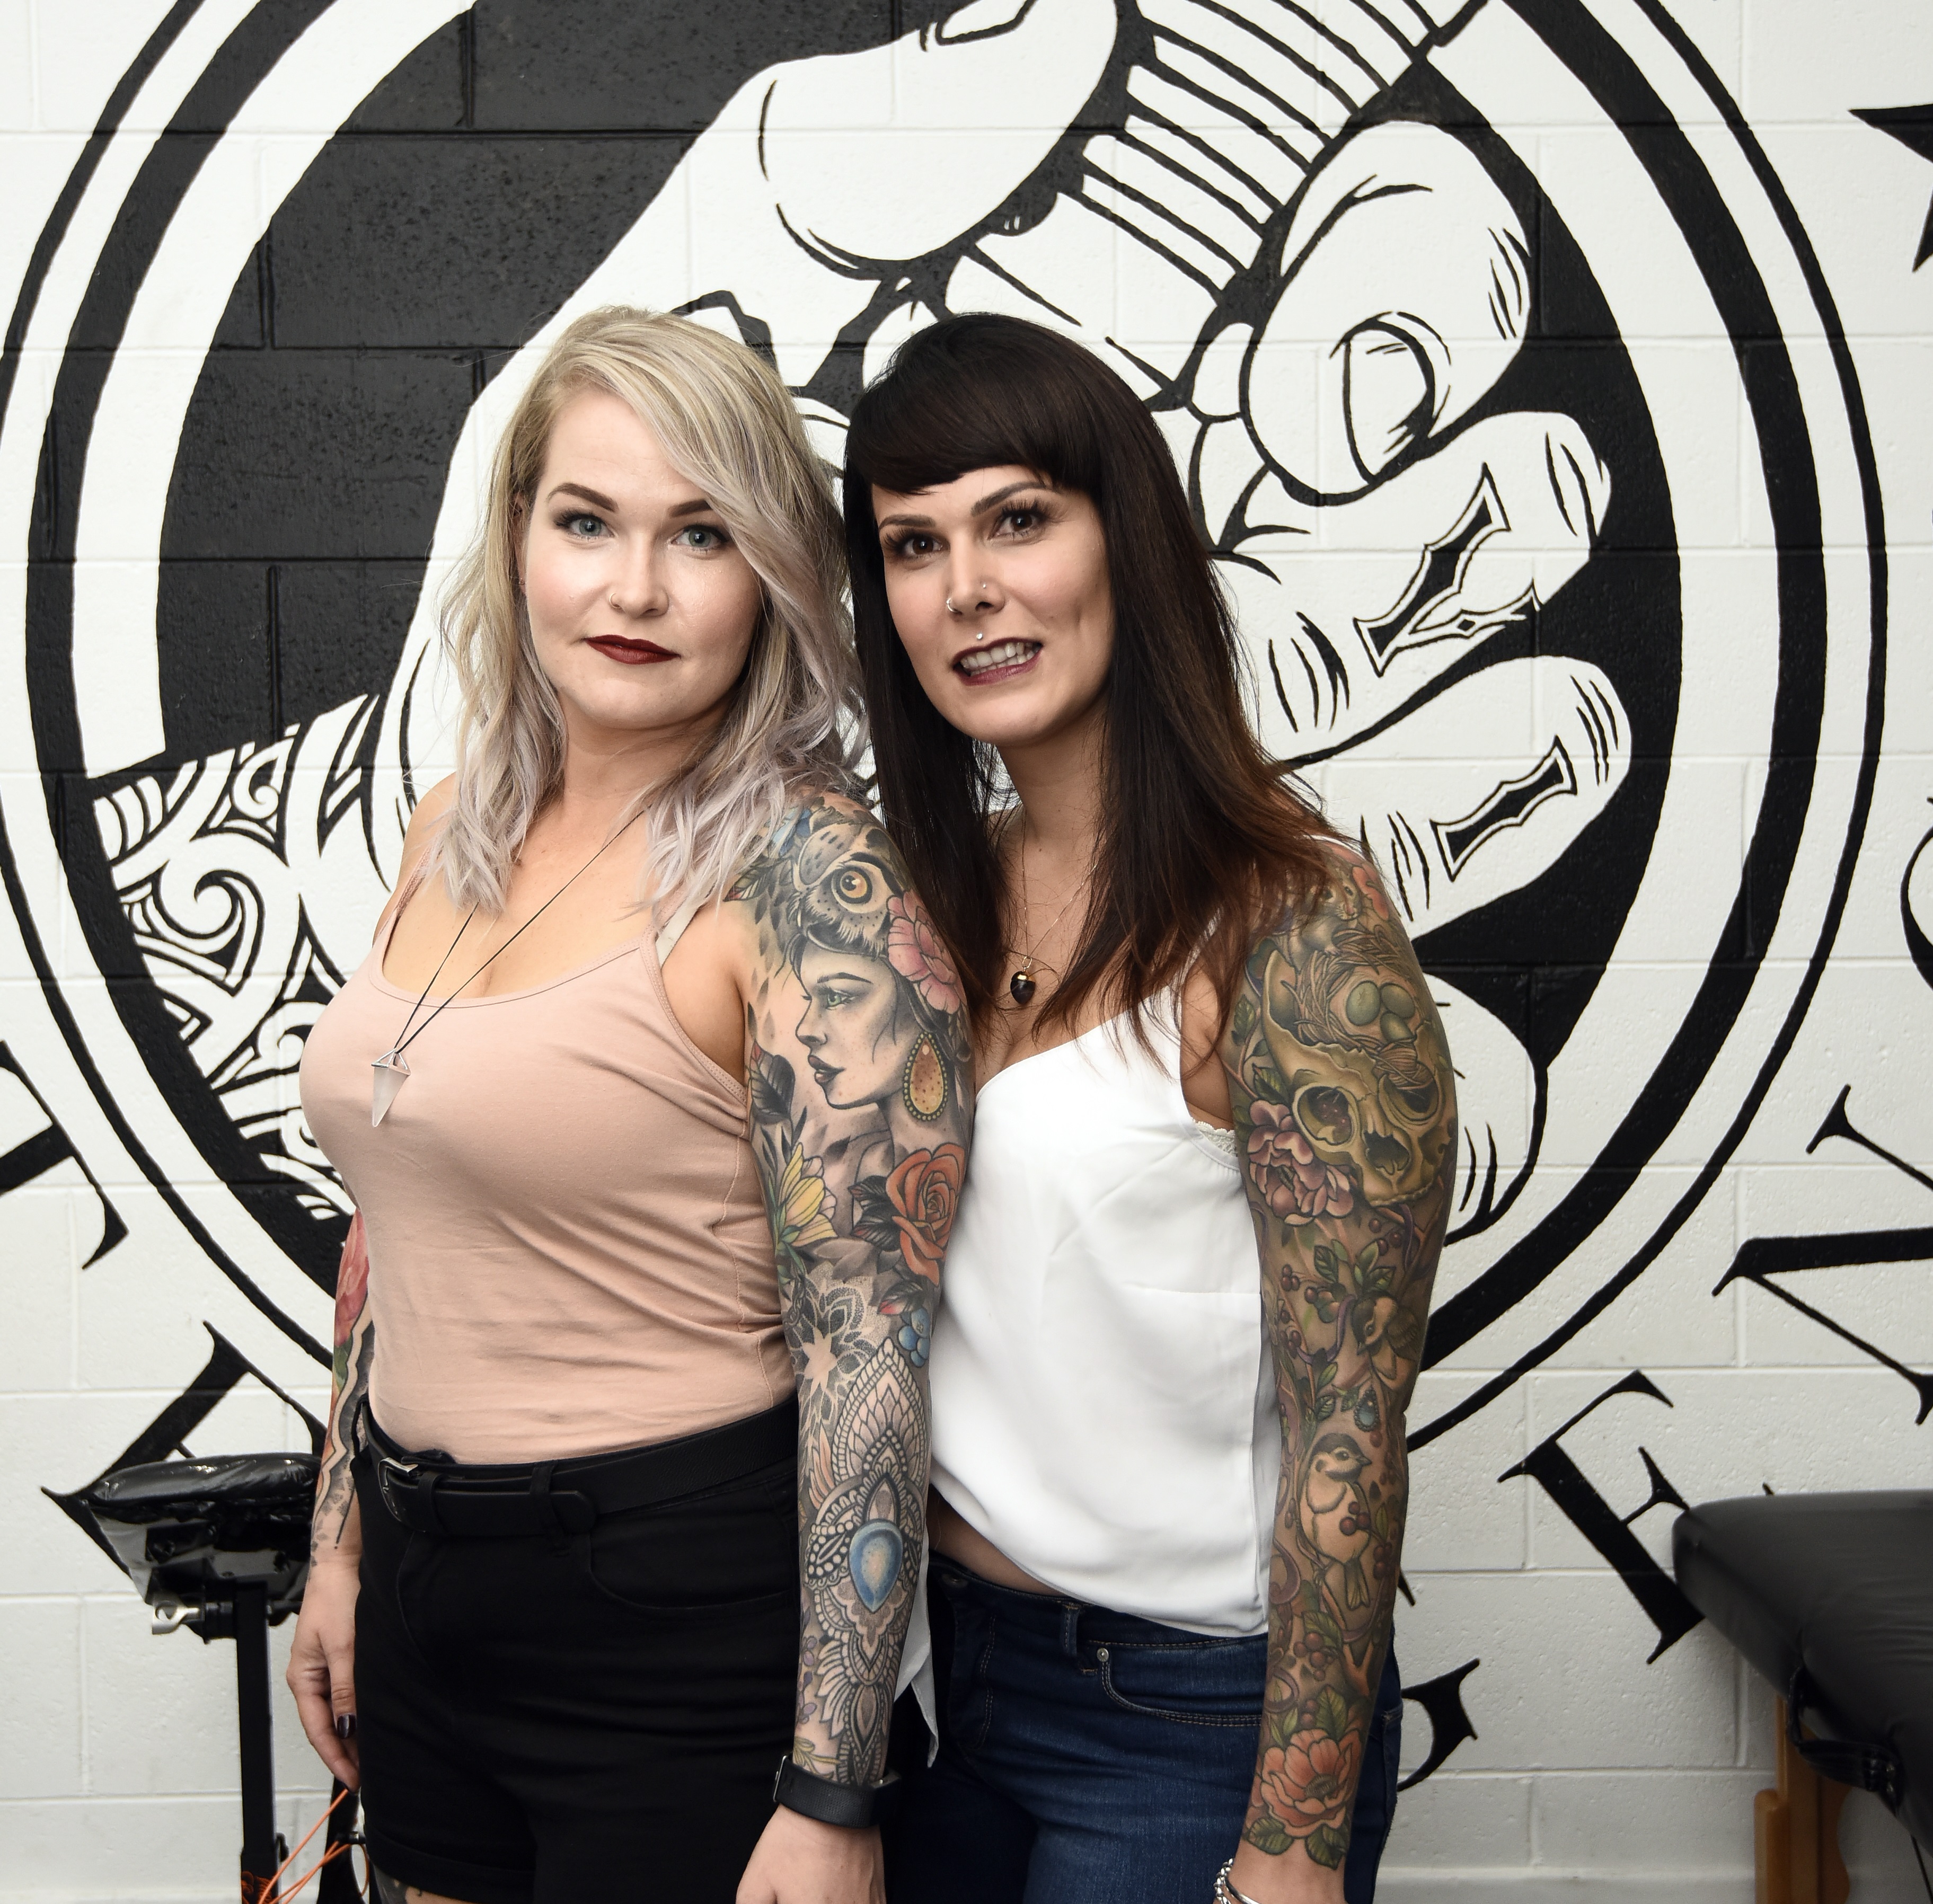 Tattoos give women confidence, make them feel 'sexy' - NZ Herald